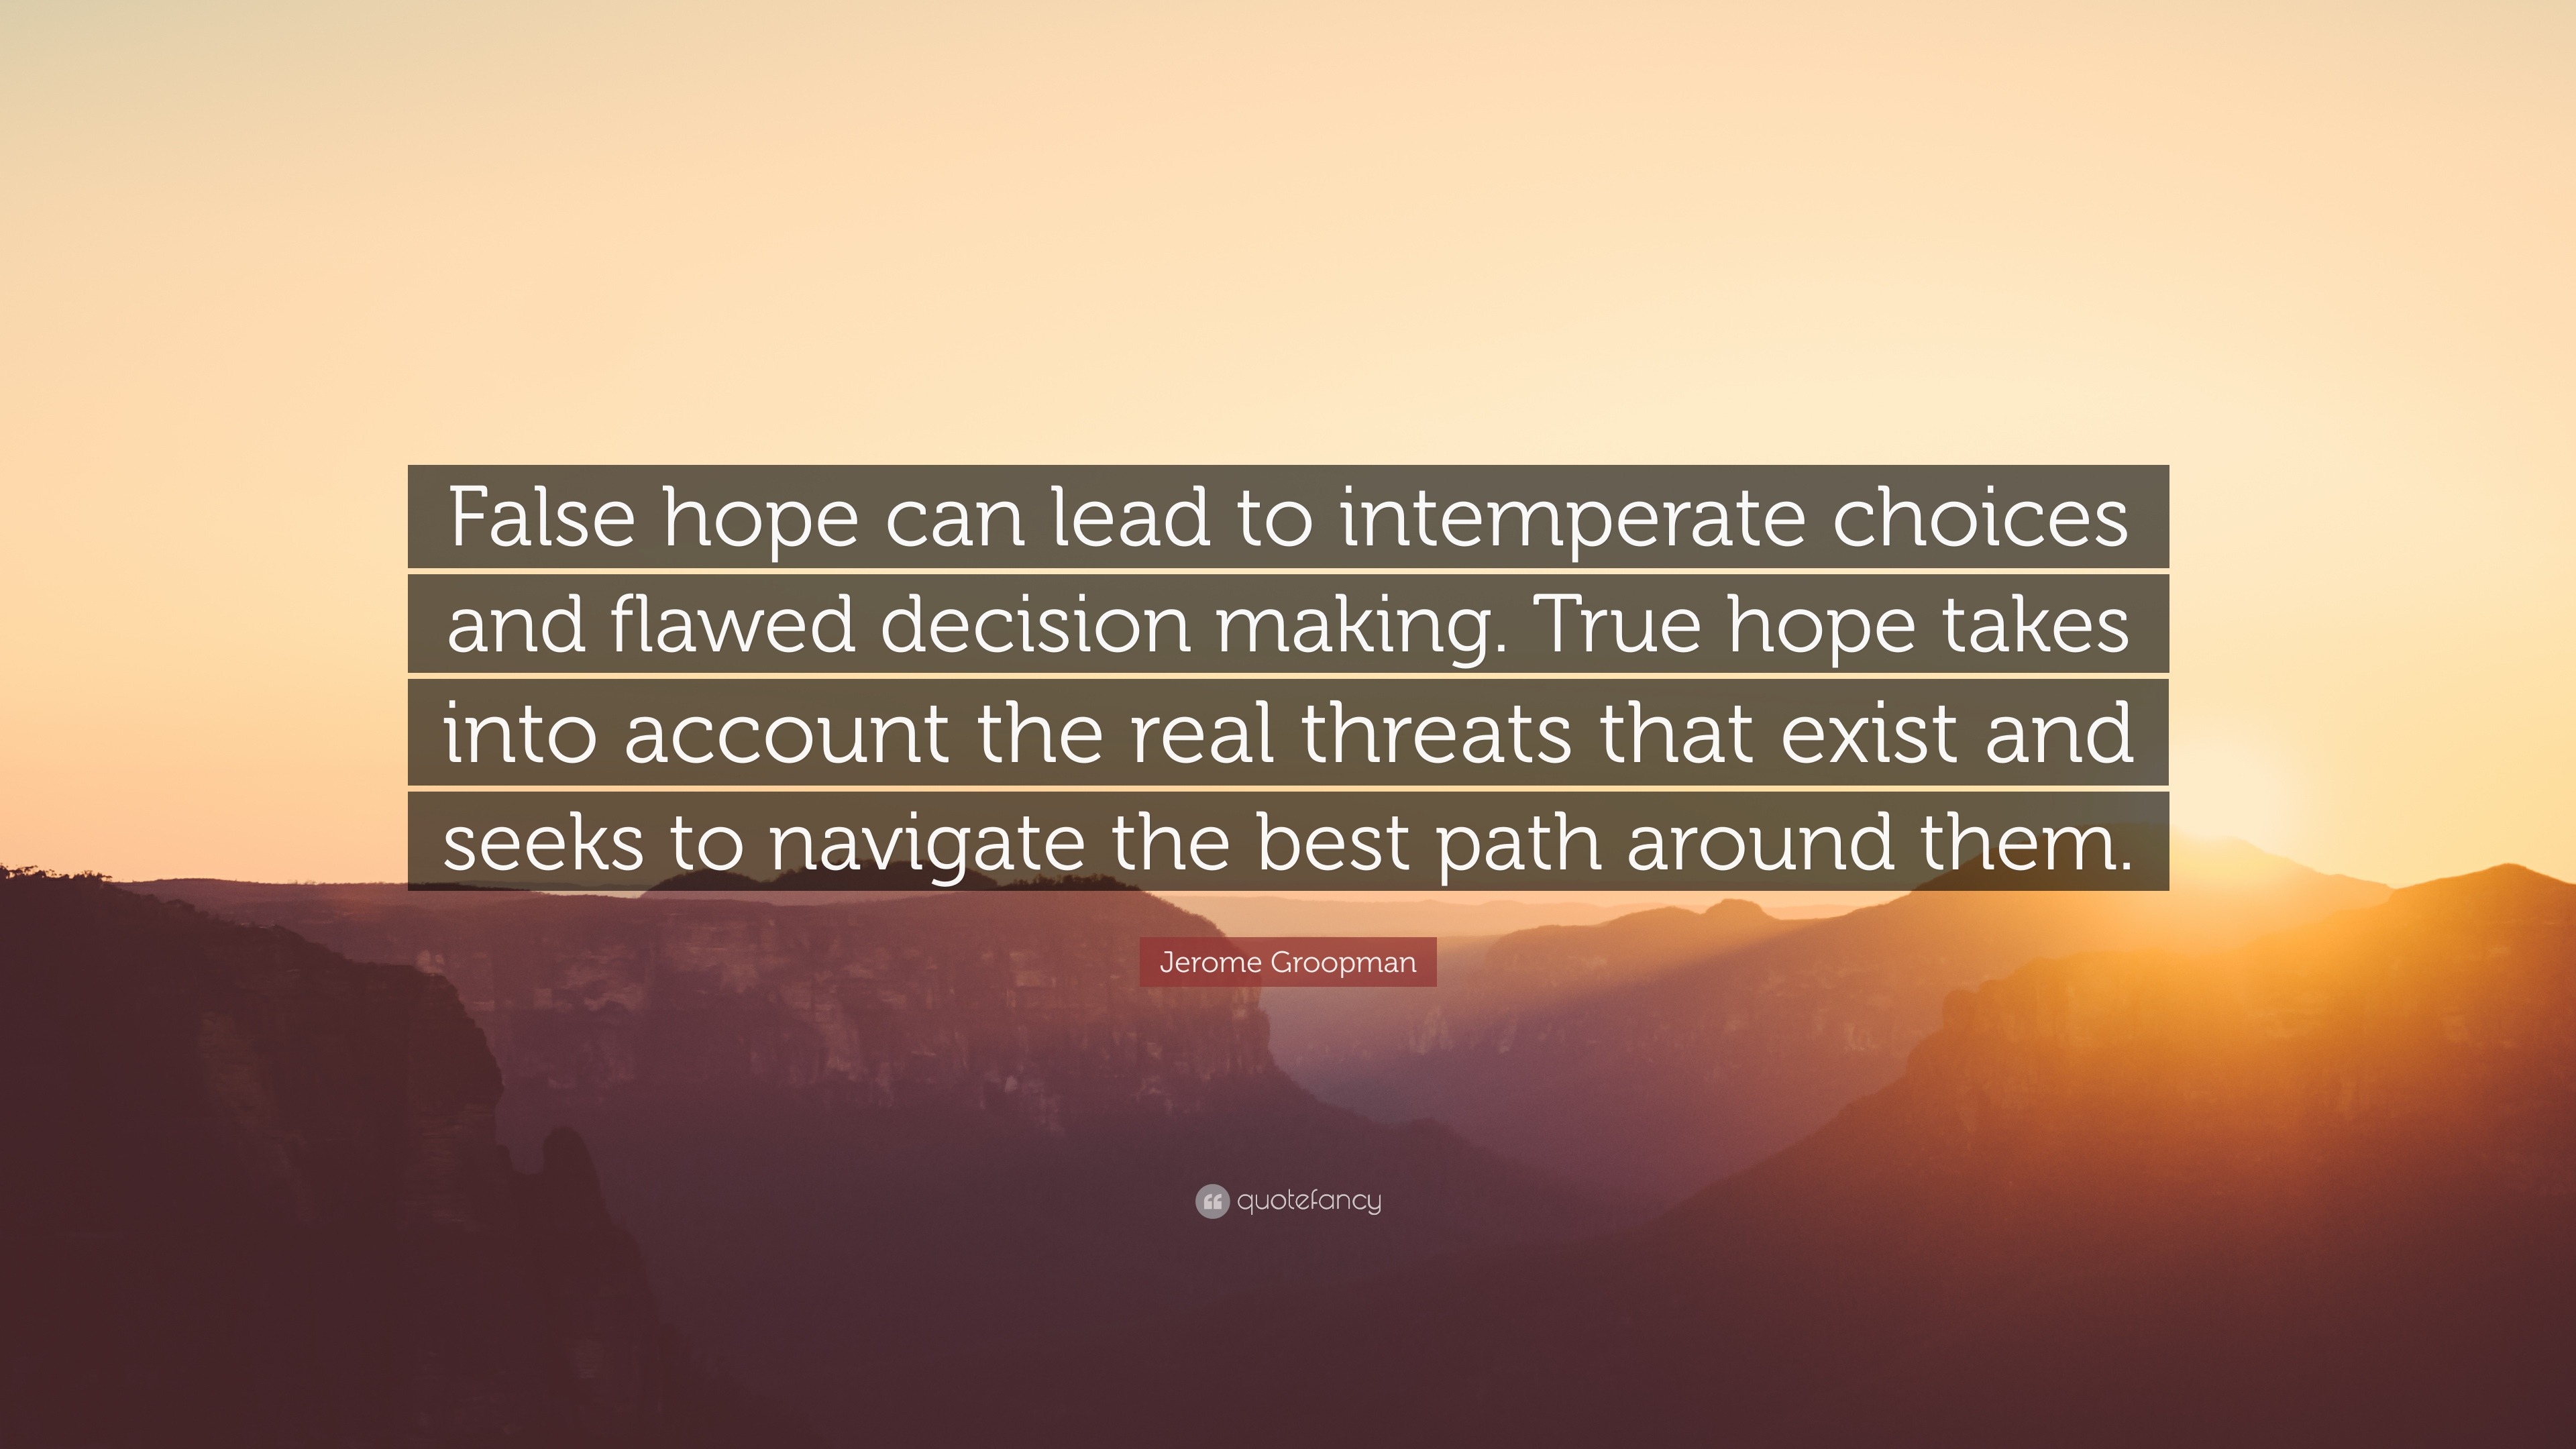 Jerome Groopman Quote: "False hope can lead to intemperate choices and flawed decision making ...